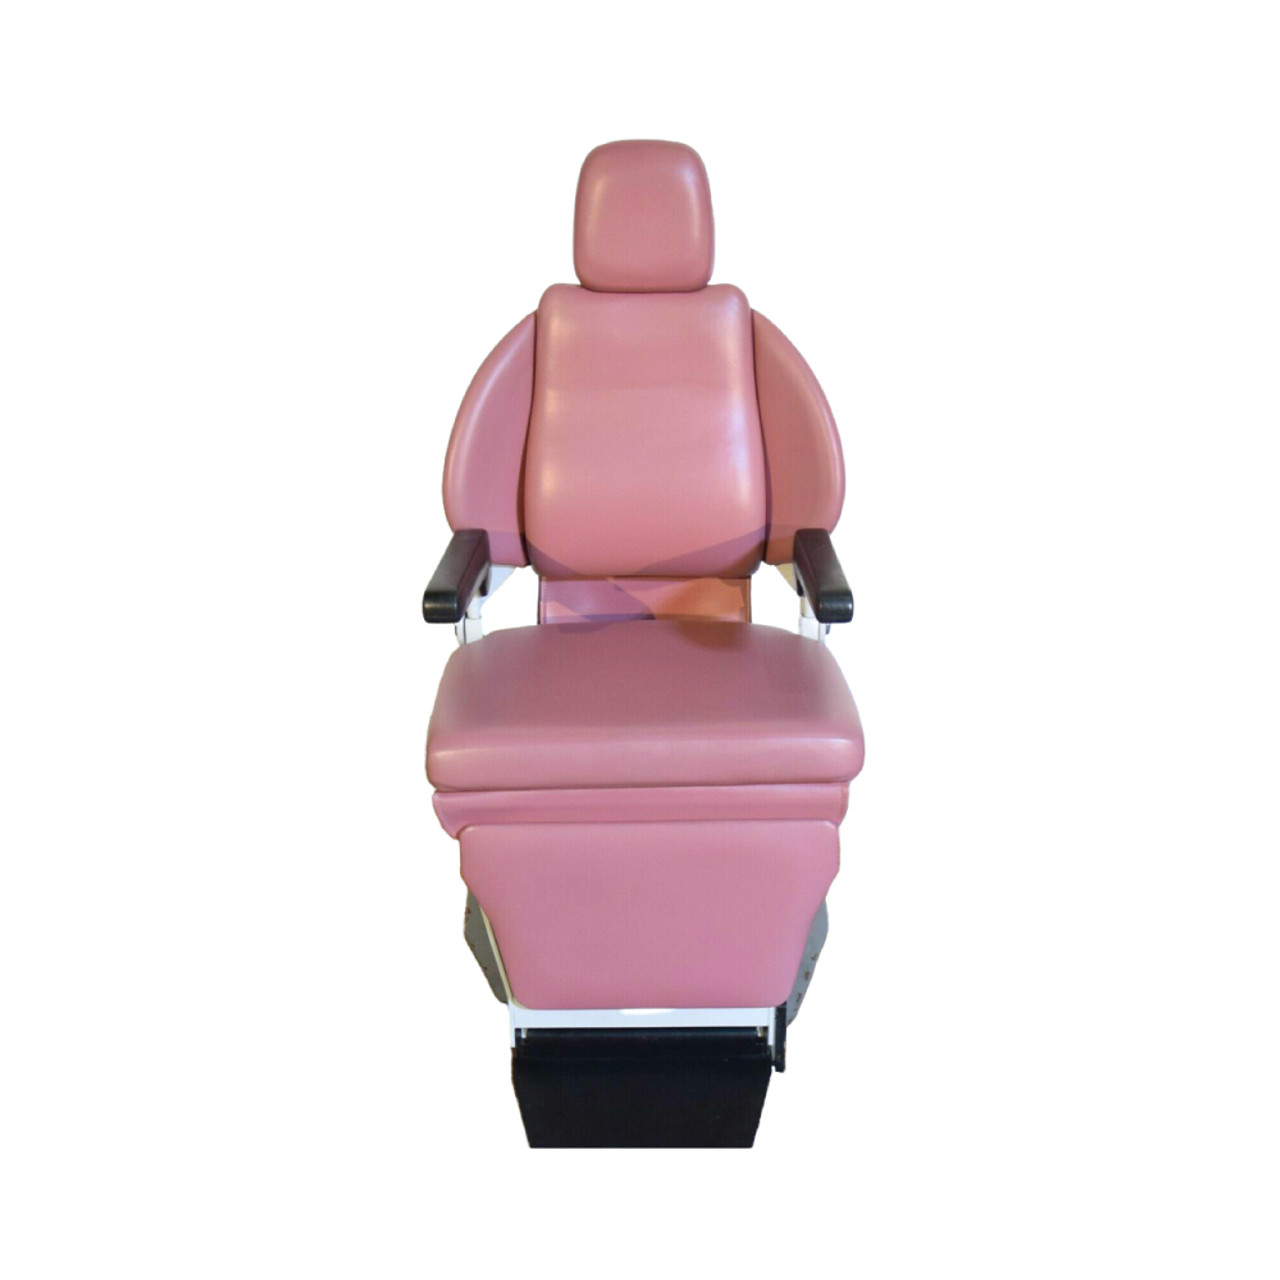 https://store.cevimed.com/images/stencil/1280x1280/products/134032/190271/Jedmed-N-Exam-Chair-01__14352.1682437474.jpg?c=1